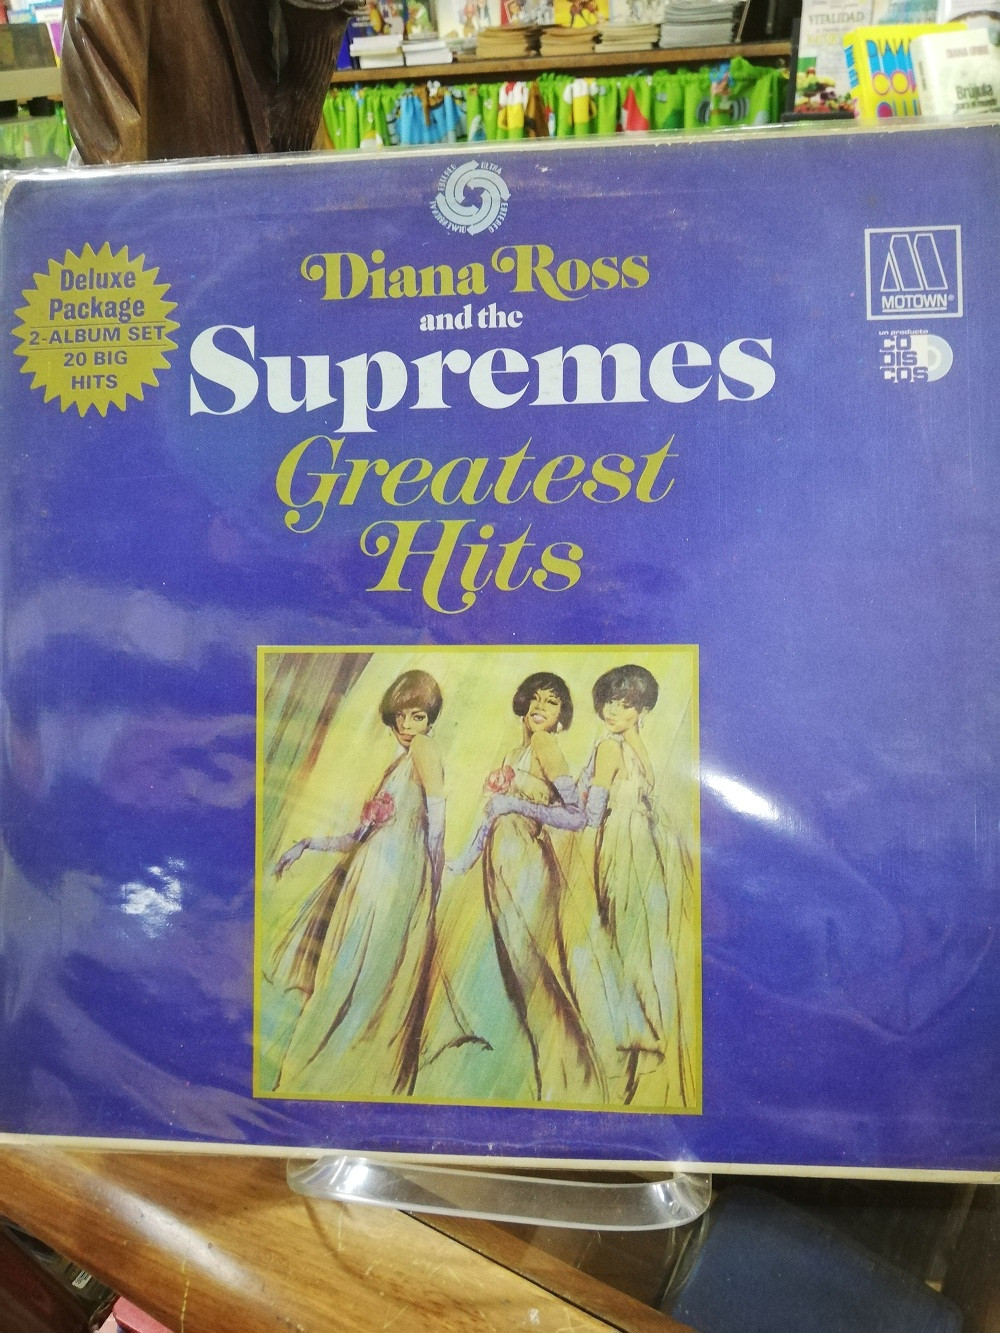 Imagen LP X 2 DIANA ROSS AND THE SUPREMES - GREATEST HITS 1